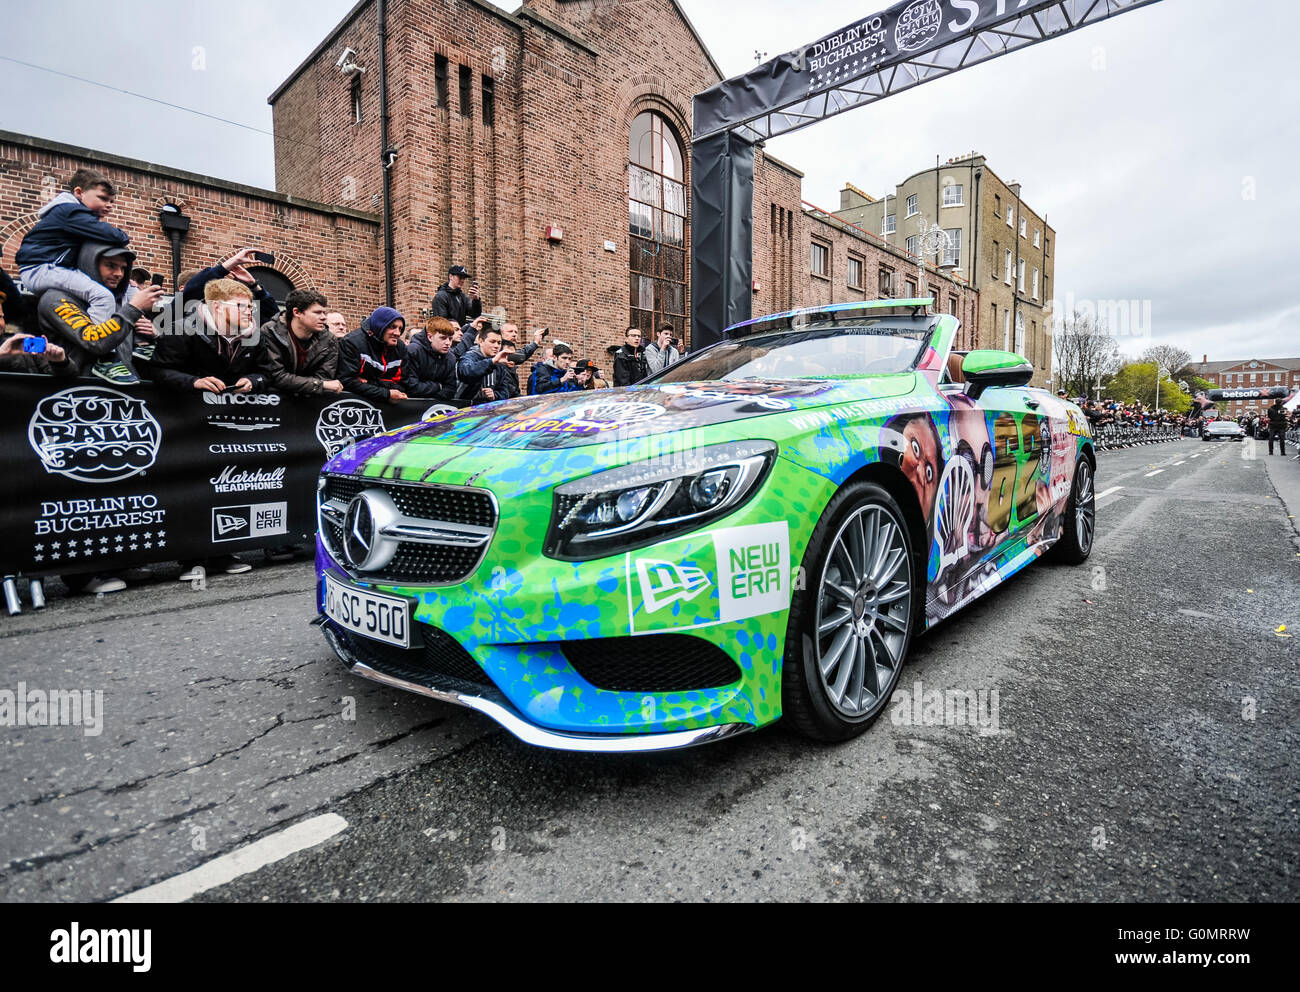 DUBLIN, IRELAND. MAY 01 2016 - The Ripley's Believe-it-or-not Mercedes S Class Cabriolet roars past the start line as the Gumball 3000 begins its 6 day drive to Bucharest. Stock Photo